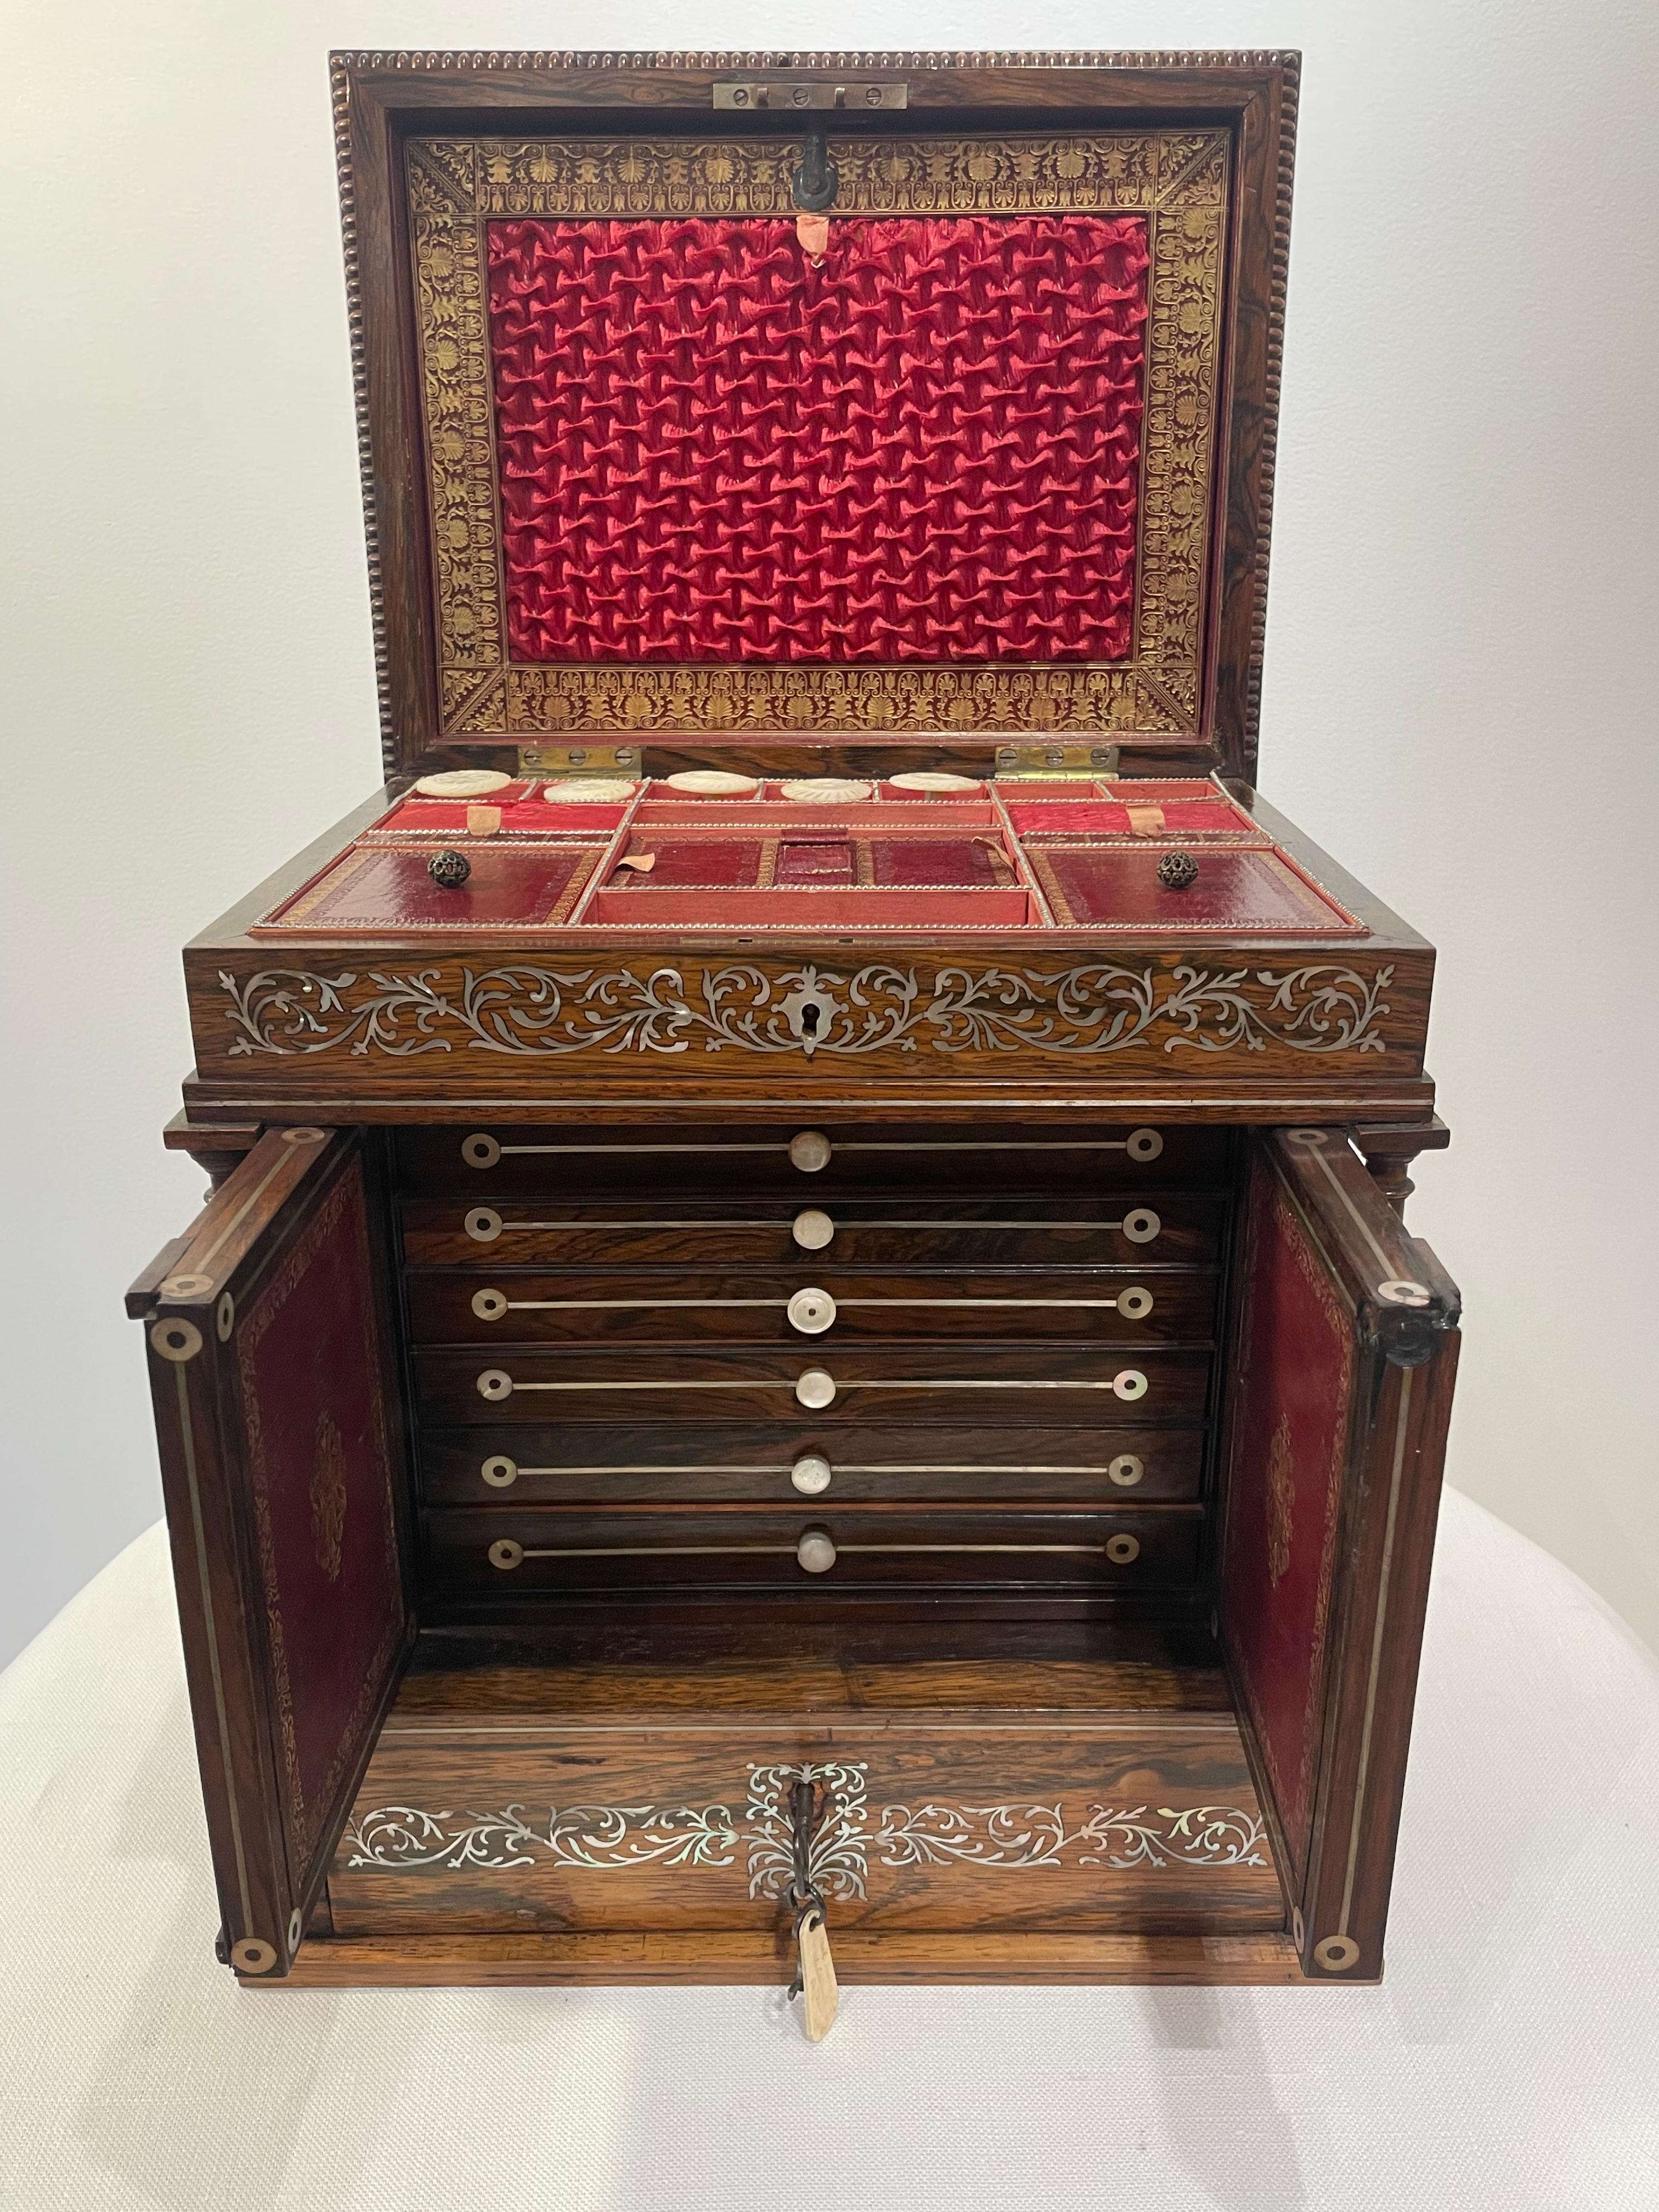 A William IV classical work box in walnut with mother-of-pearl inlay detail. Of classical form in the shape of a Grecian temple, the workbox comes from the collection of Ann Margaret and includes various original components to the interior. 